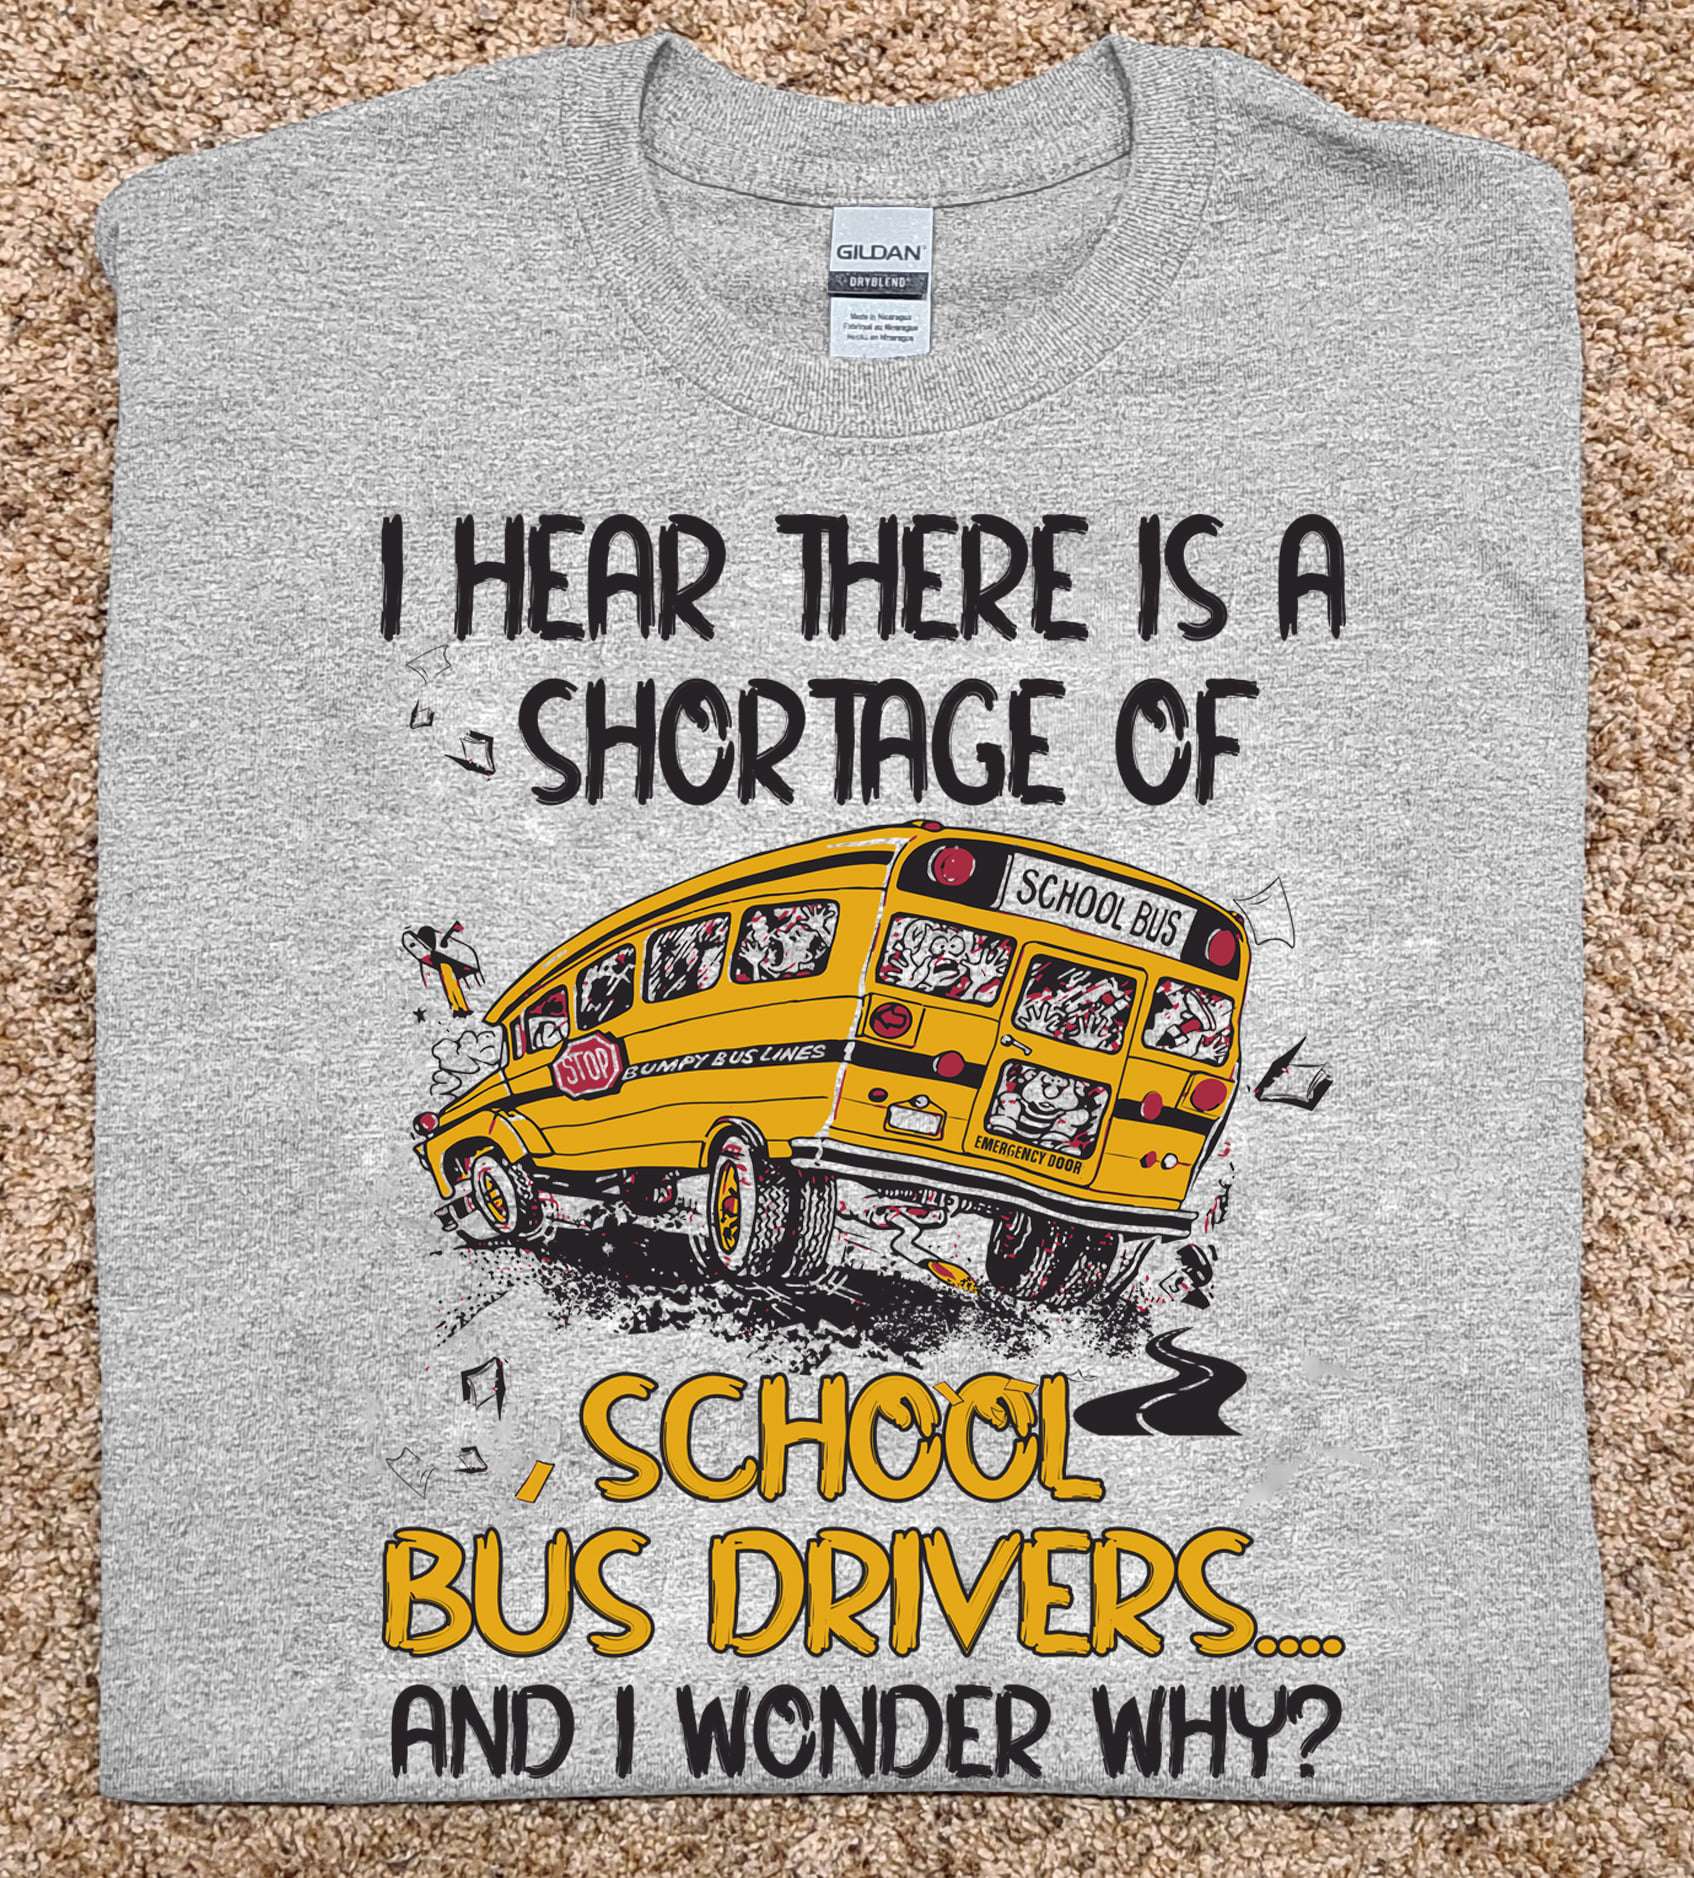 I hear there is a shortage of school bus drivers - Bus driver the job, school bus